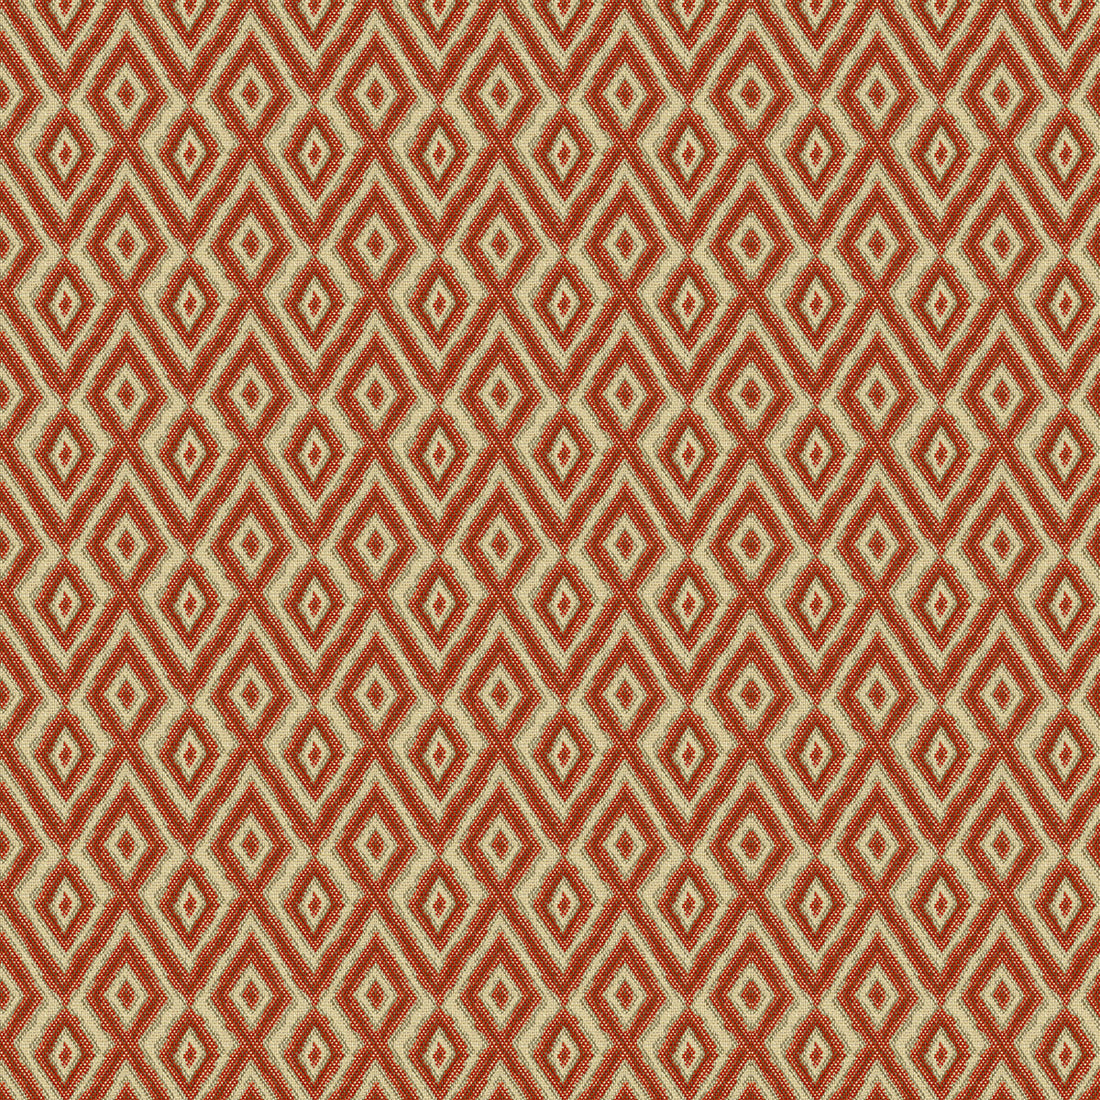 Banati fabric in persimmon color - pattern 33863.1612.0 - by Kravet Contract in the Tanzania J Banks collection